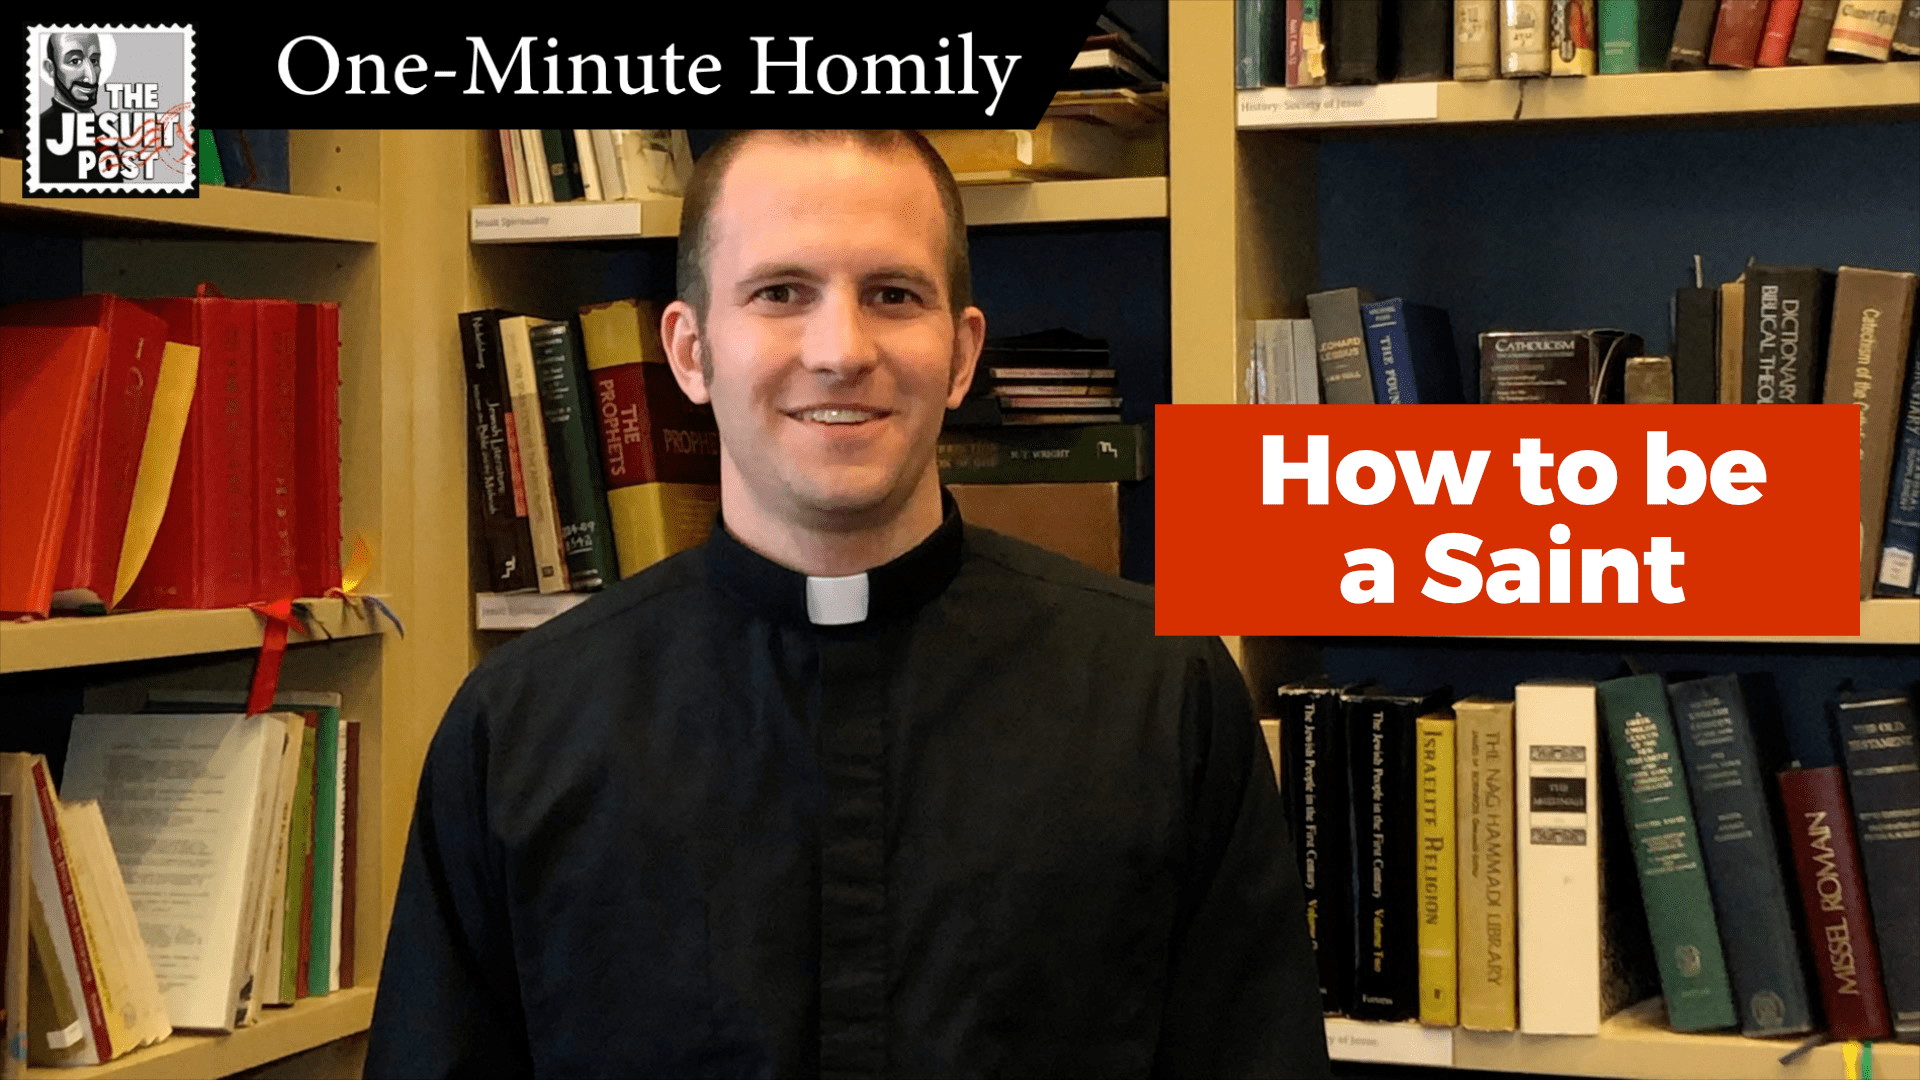 One-Minute Homily: “How to be a Saint”